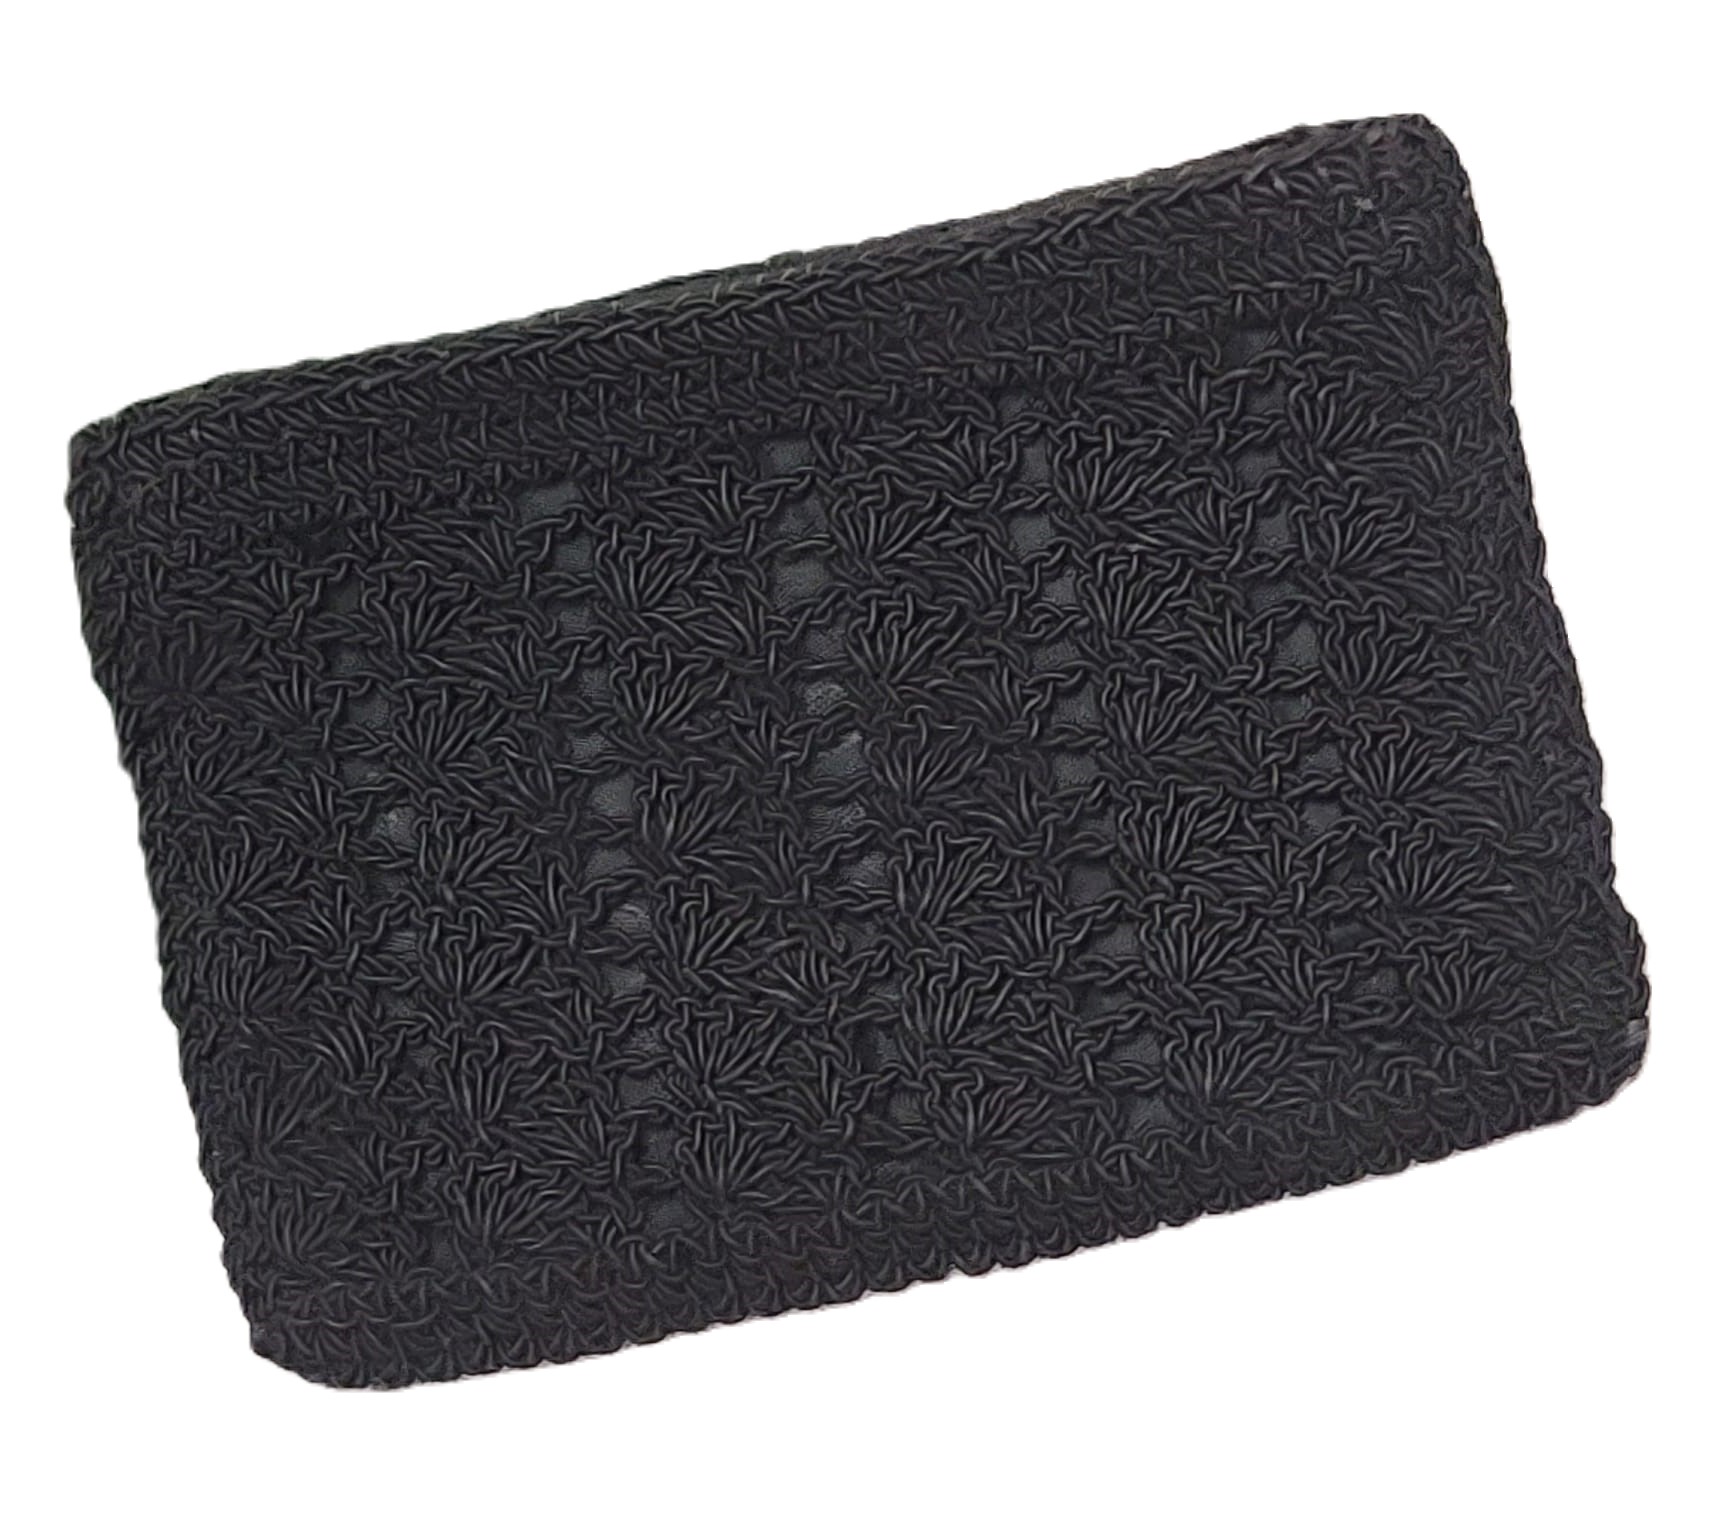 vintage black crochet coin or cosmetic purse - Click Image to Close